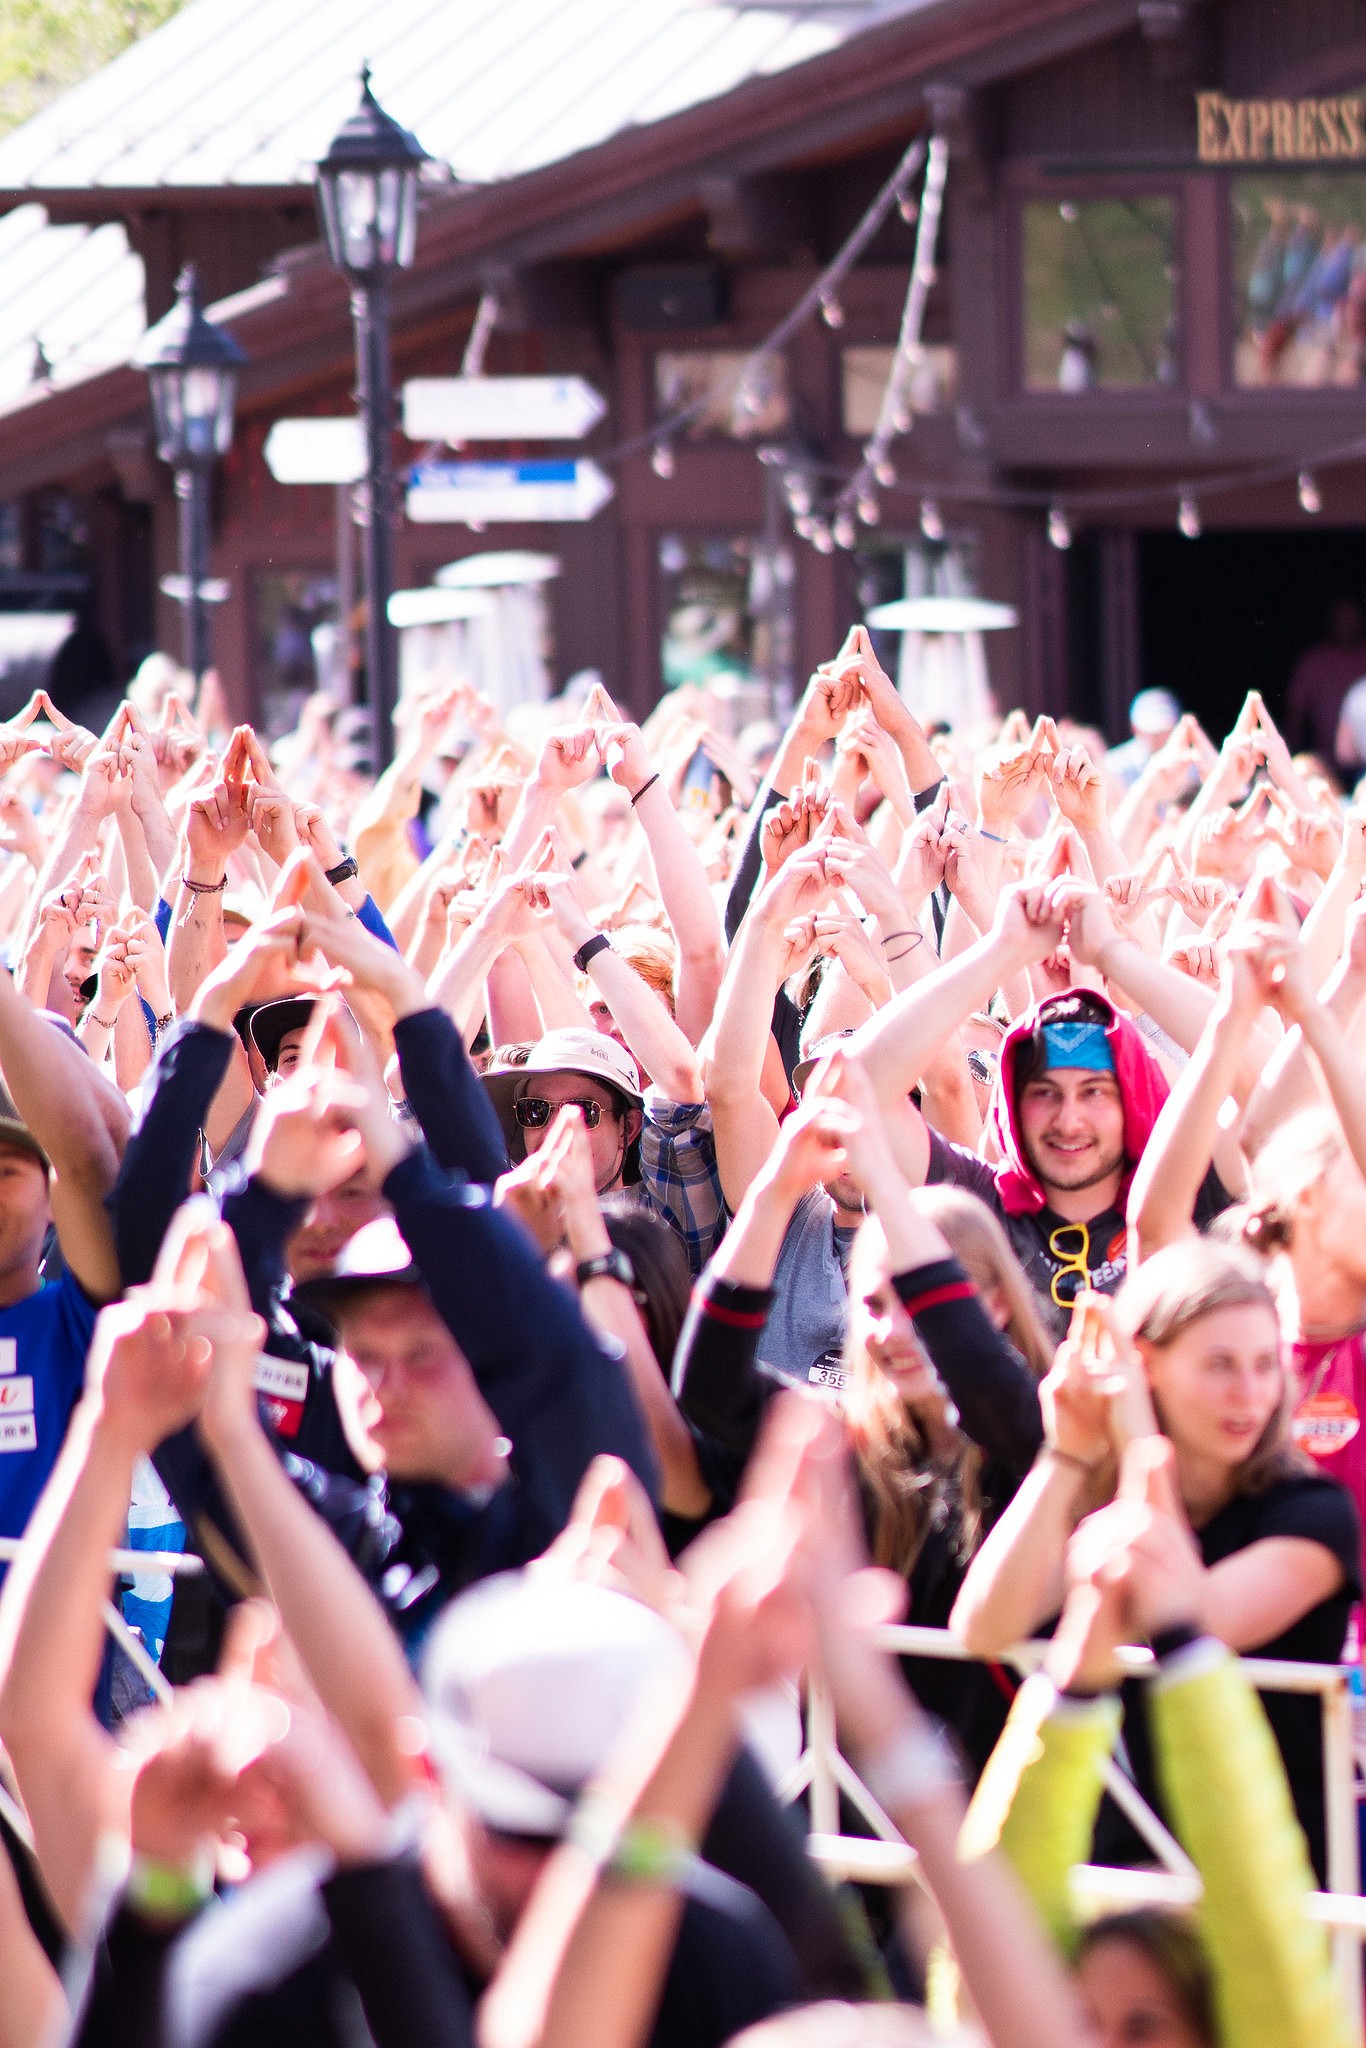 Spectators at the IFSC World Cup in Vail, Colorado, show their support for Paris 2024.  © Dan Gajda/IFSC